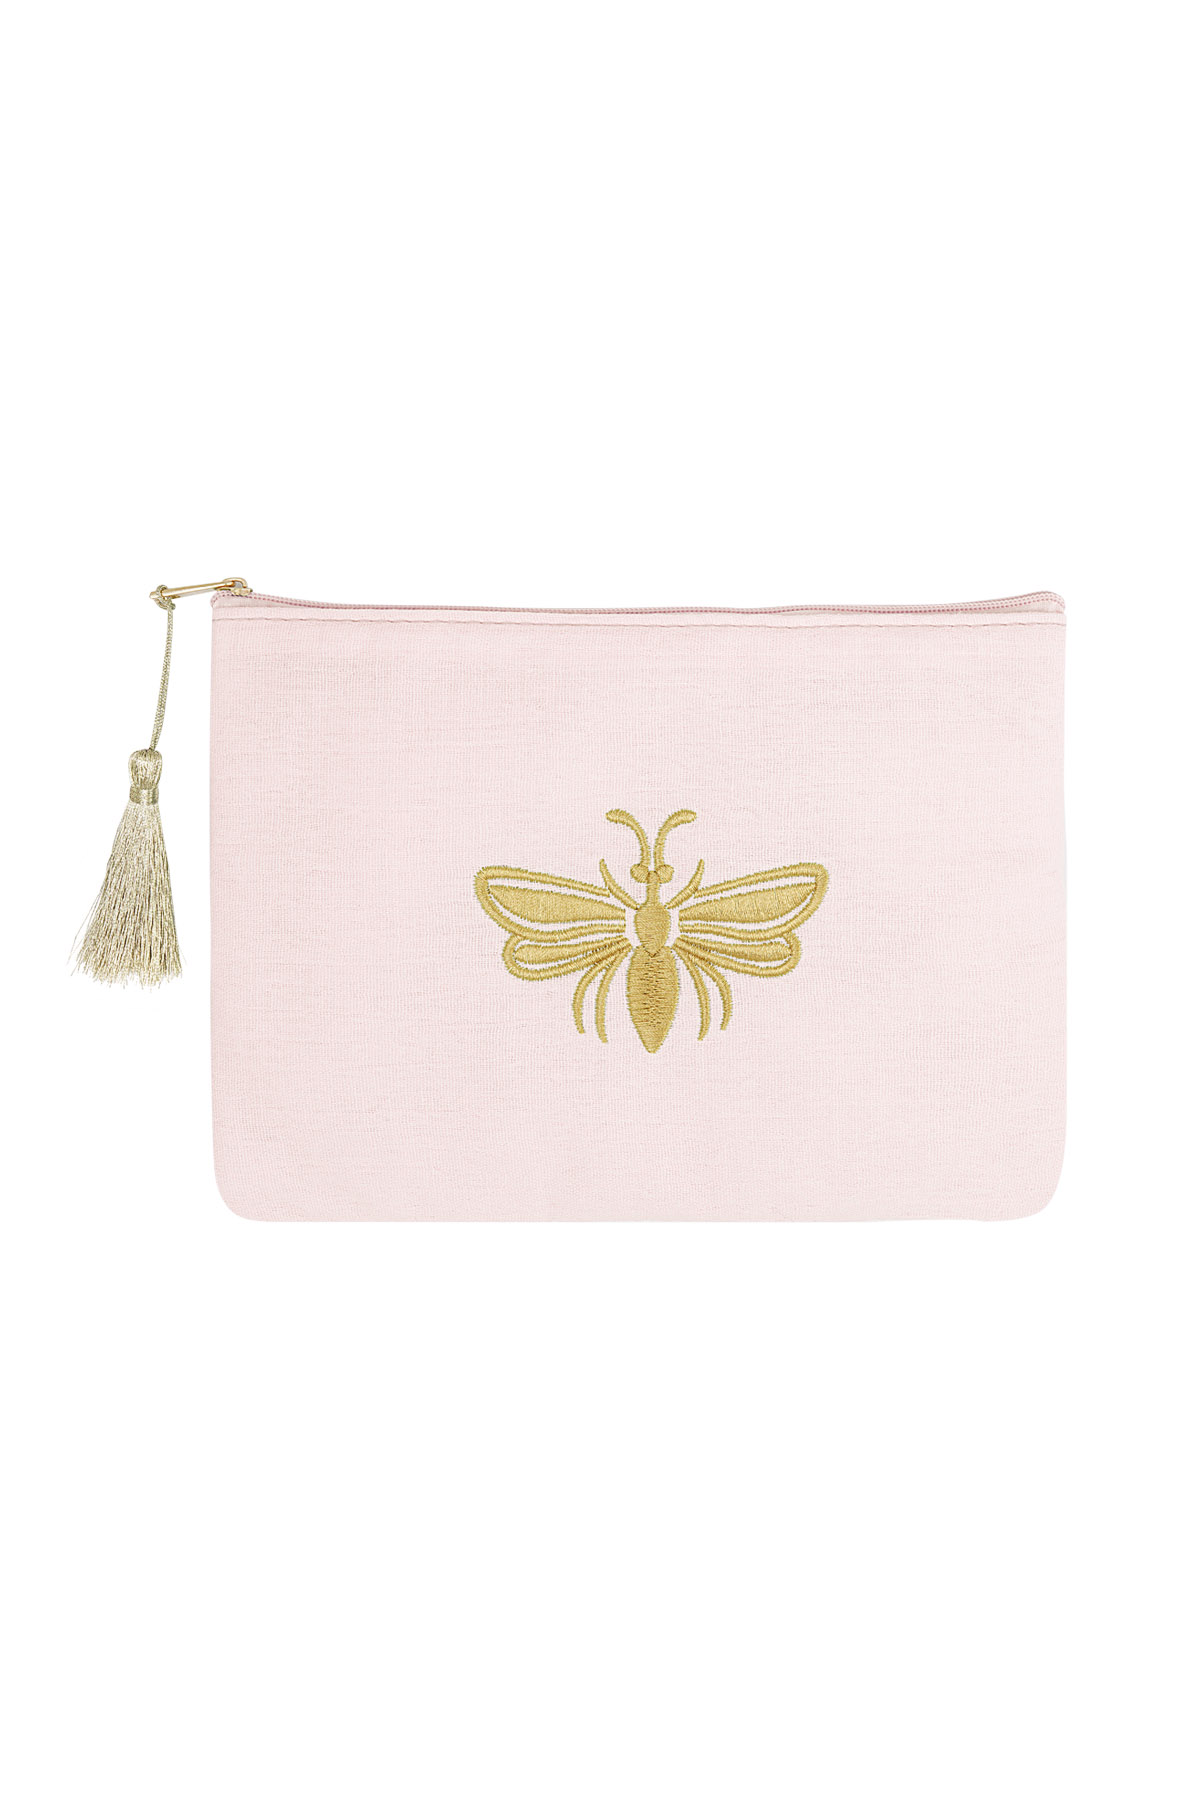 Make-up bag with golden bee - pale pink